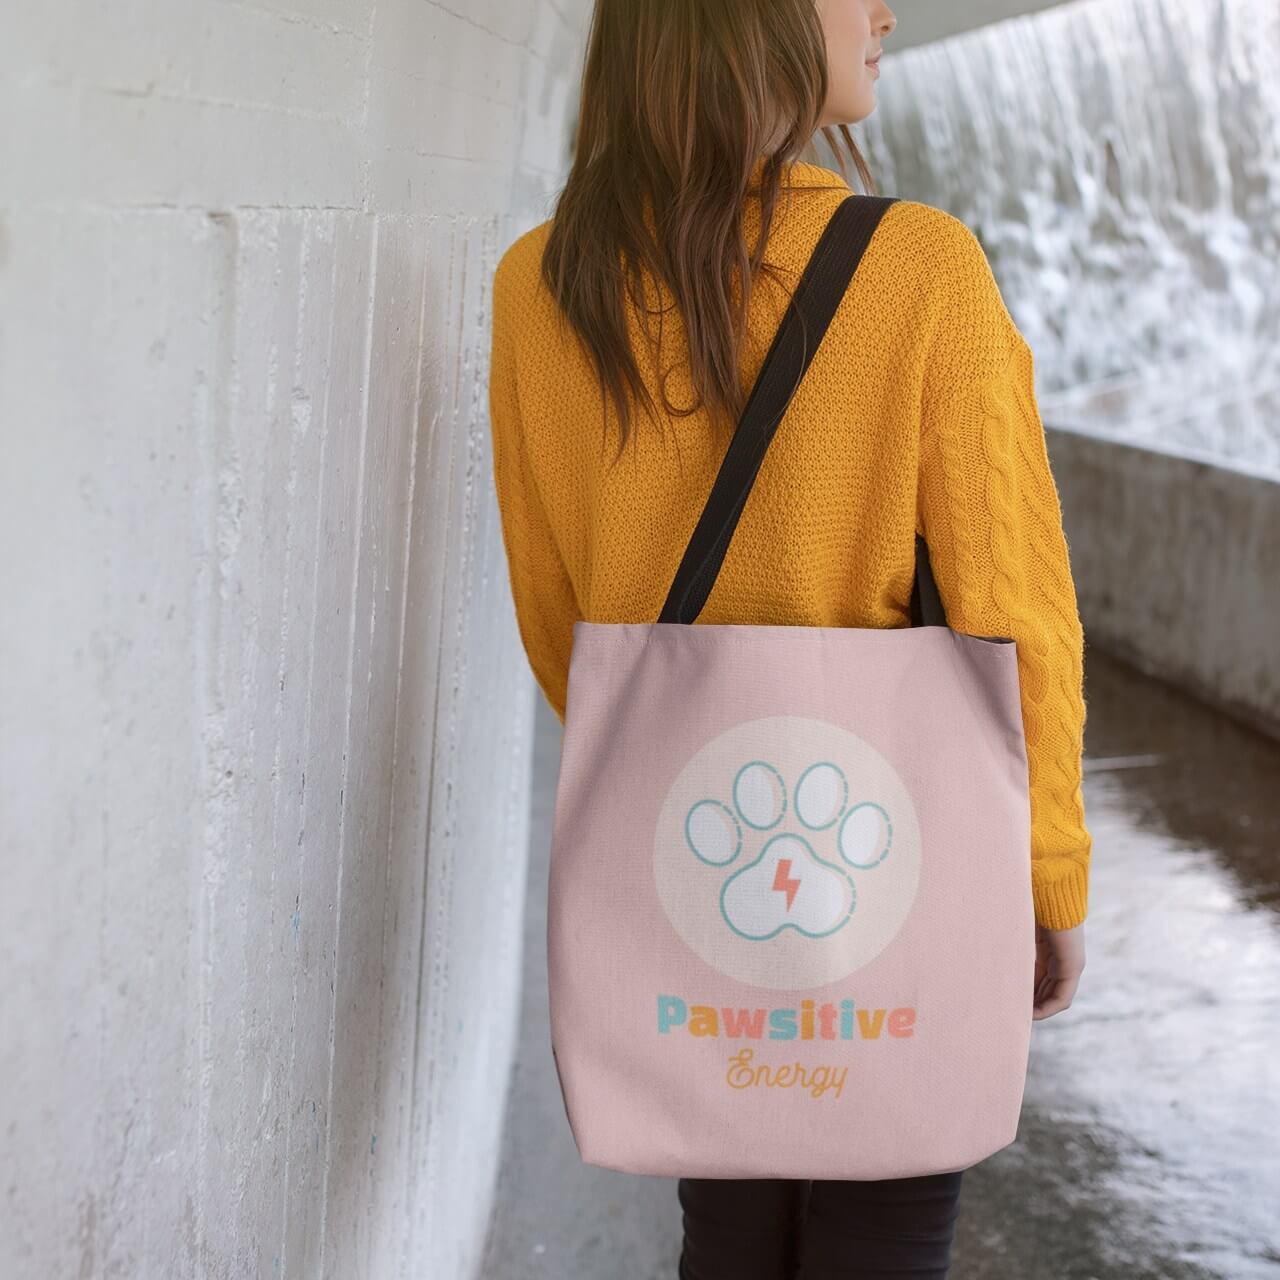 Pawsitive Energy Shoulder Tote Bag For Animal Lovers